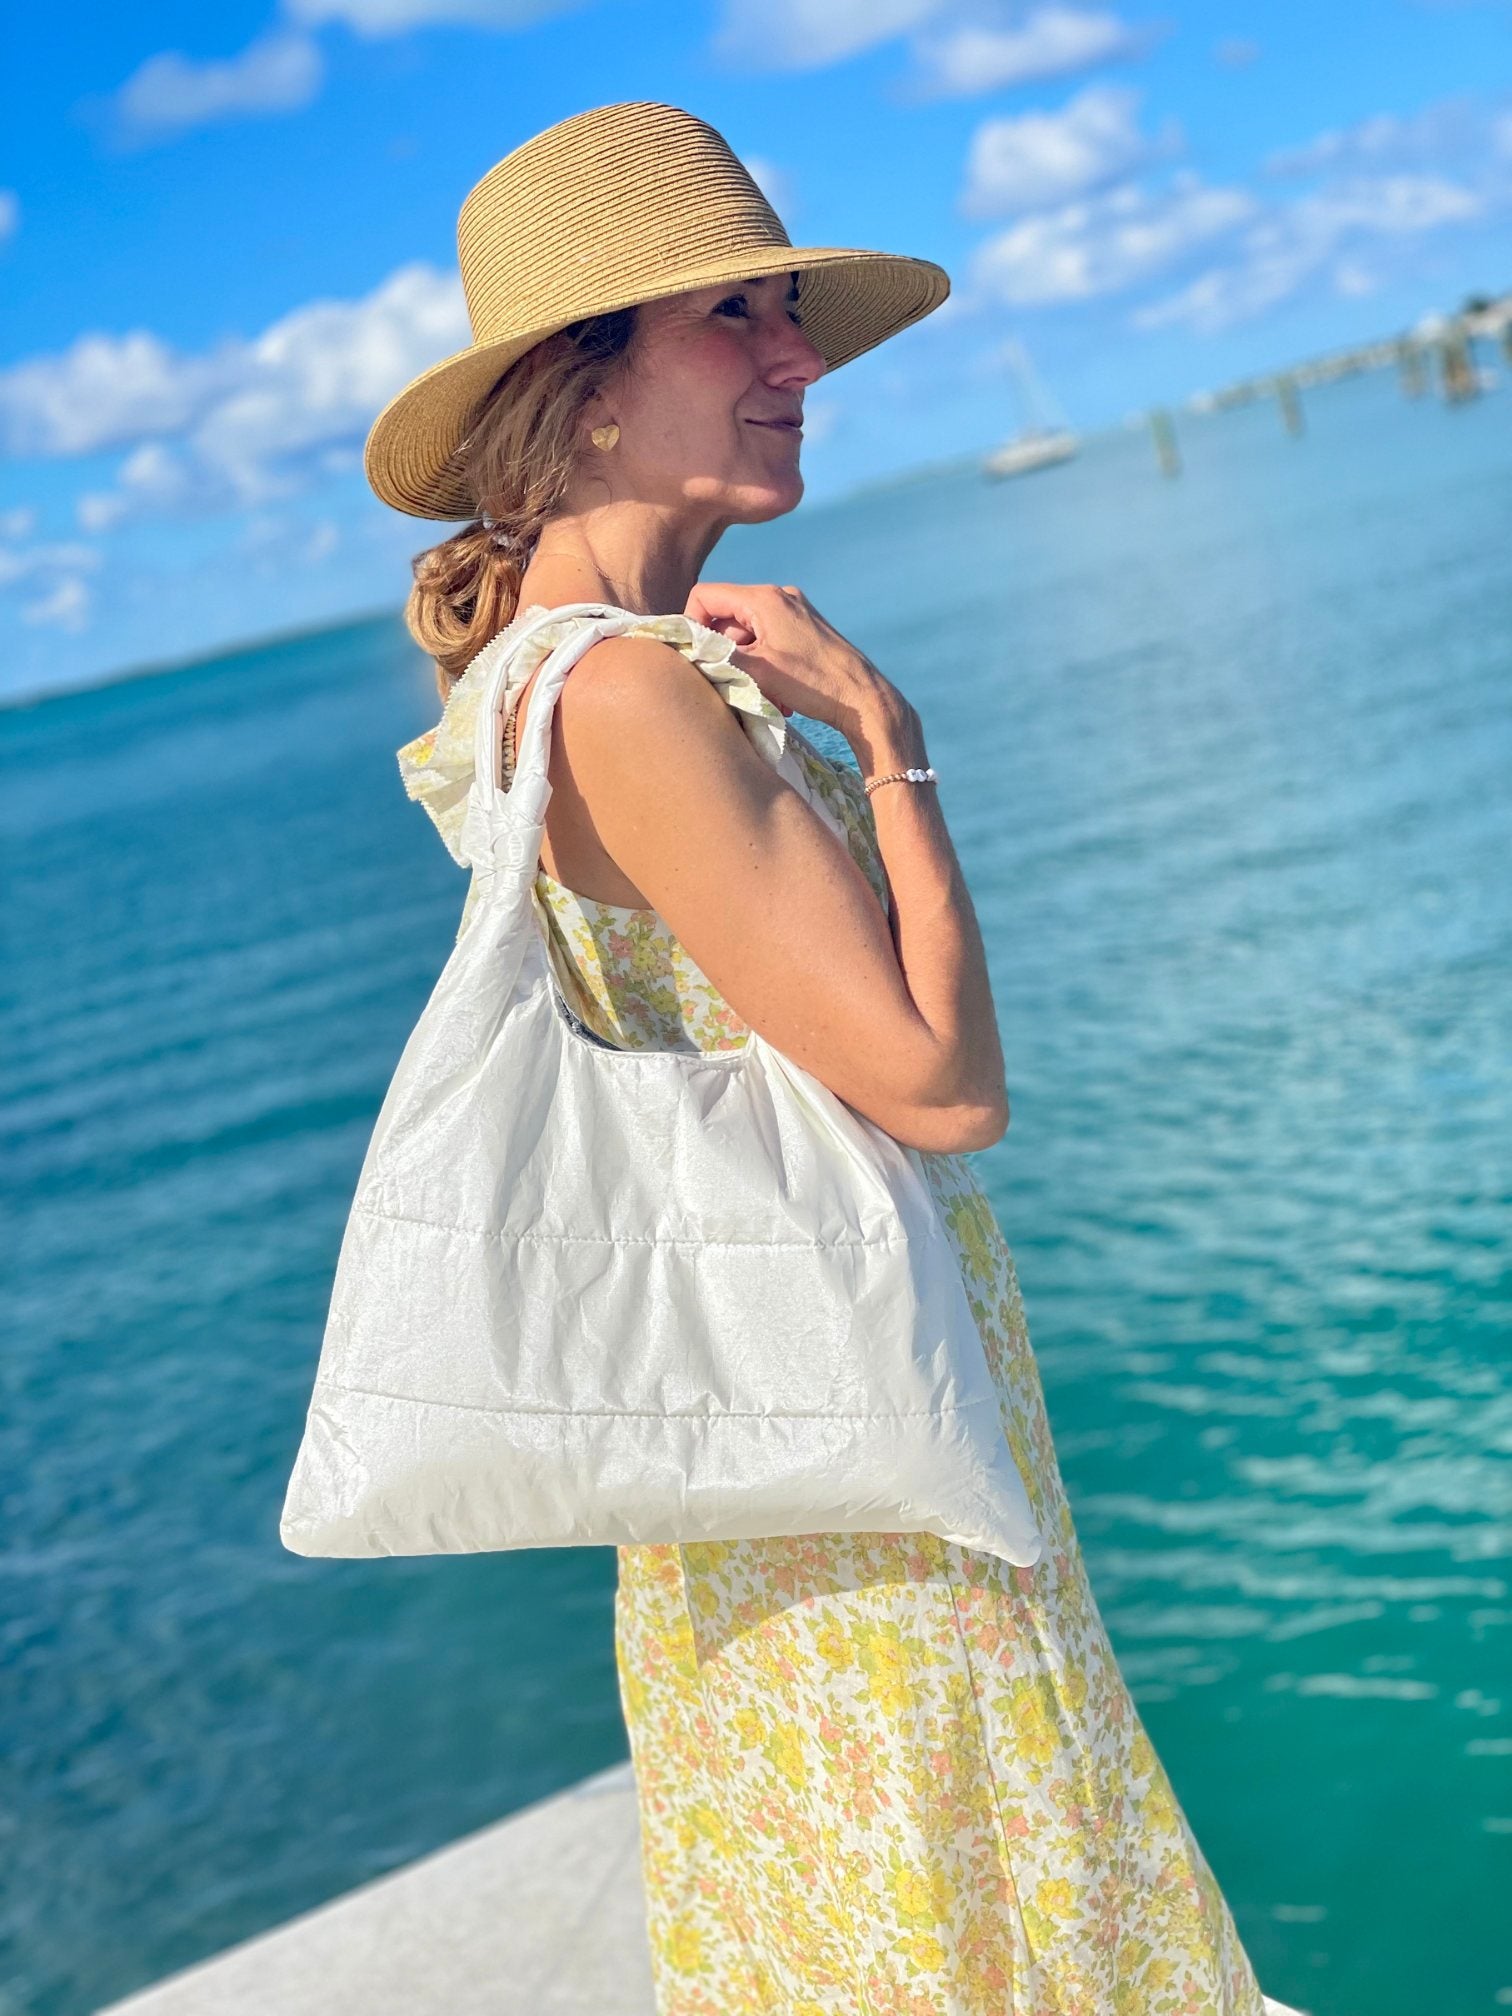 Love Me "Knot" Puffer Purse Tote in Shimmer White